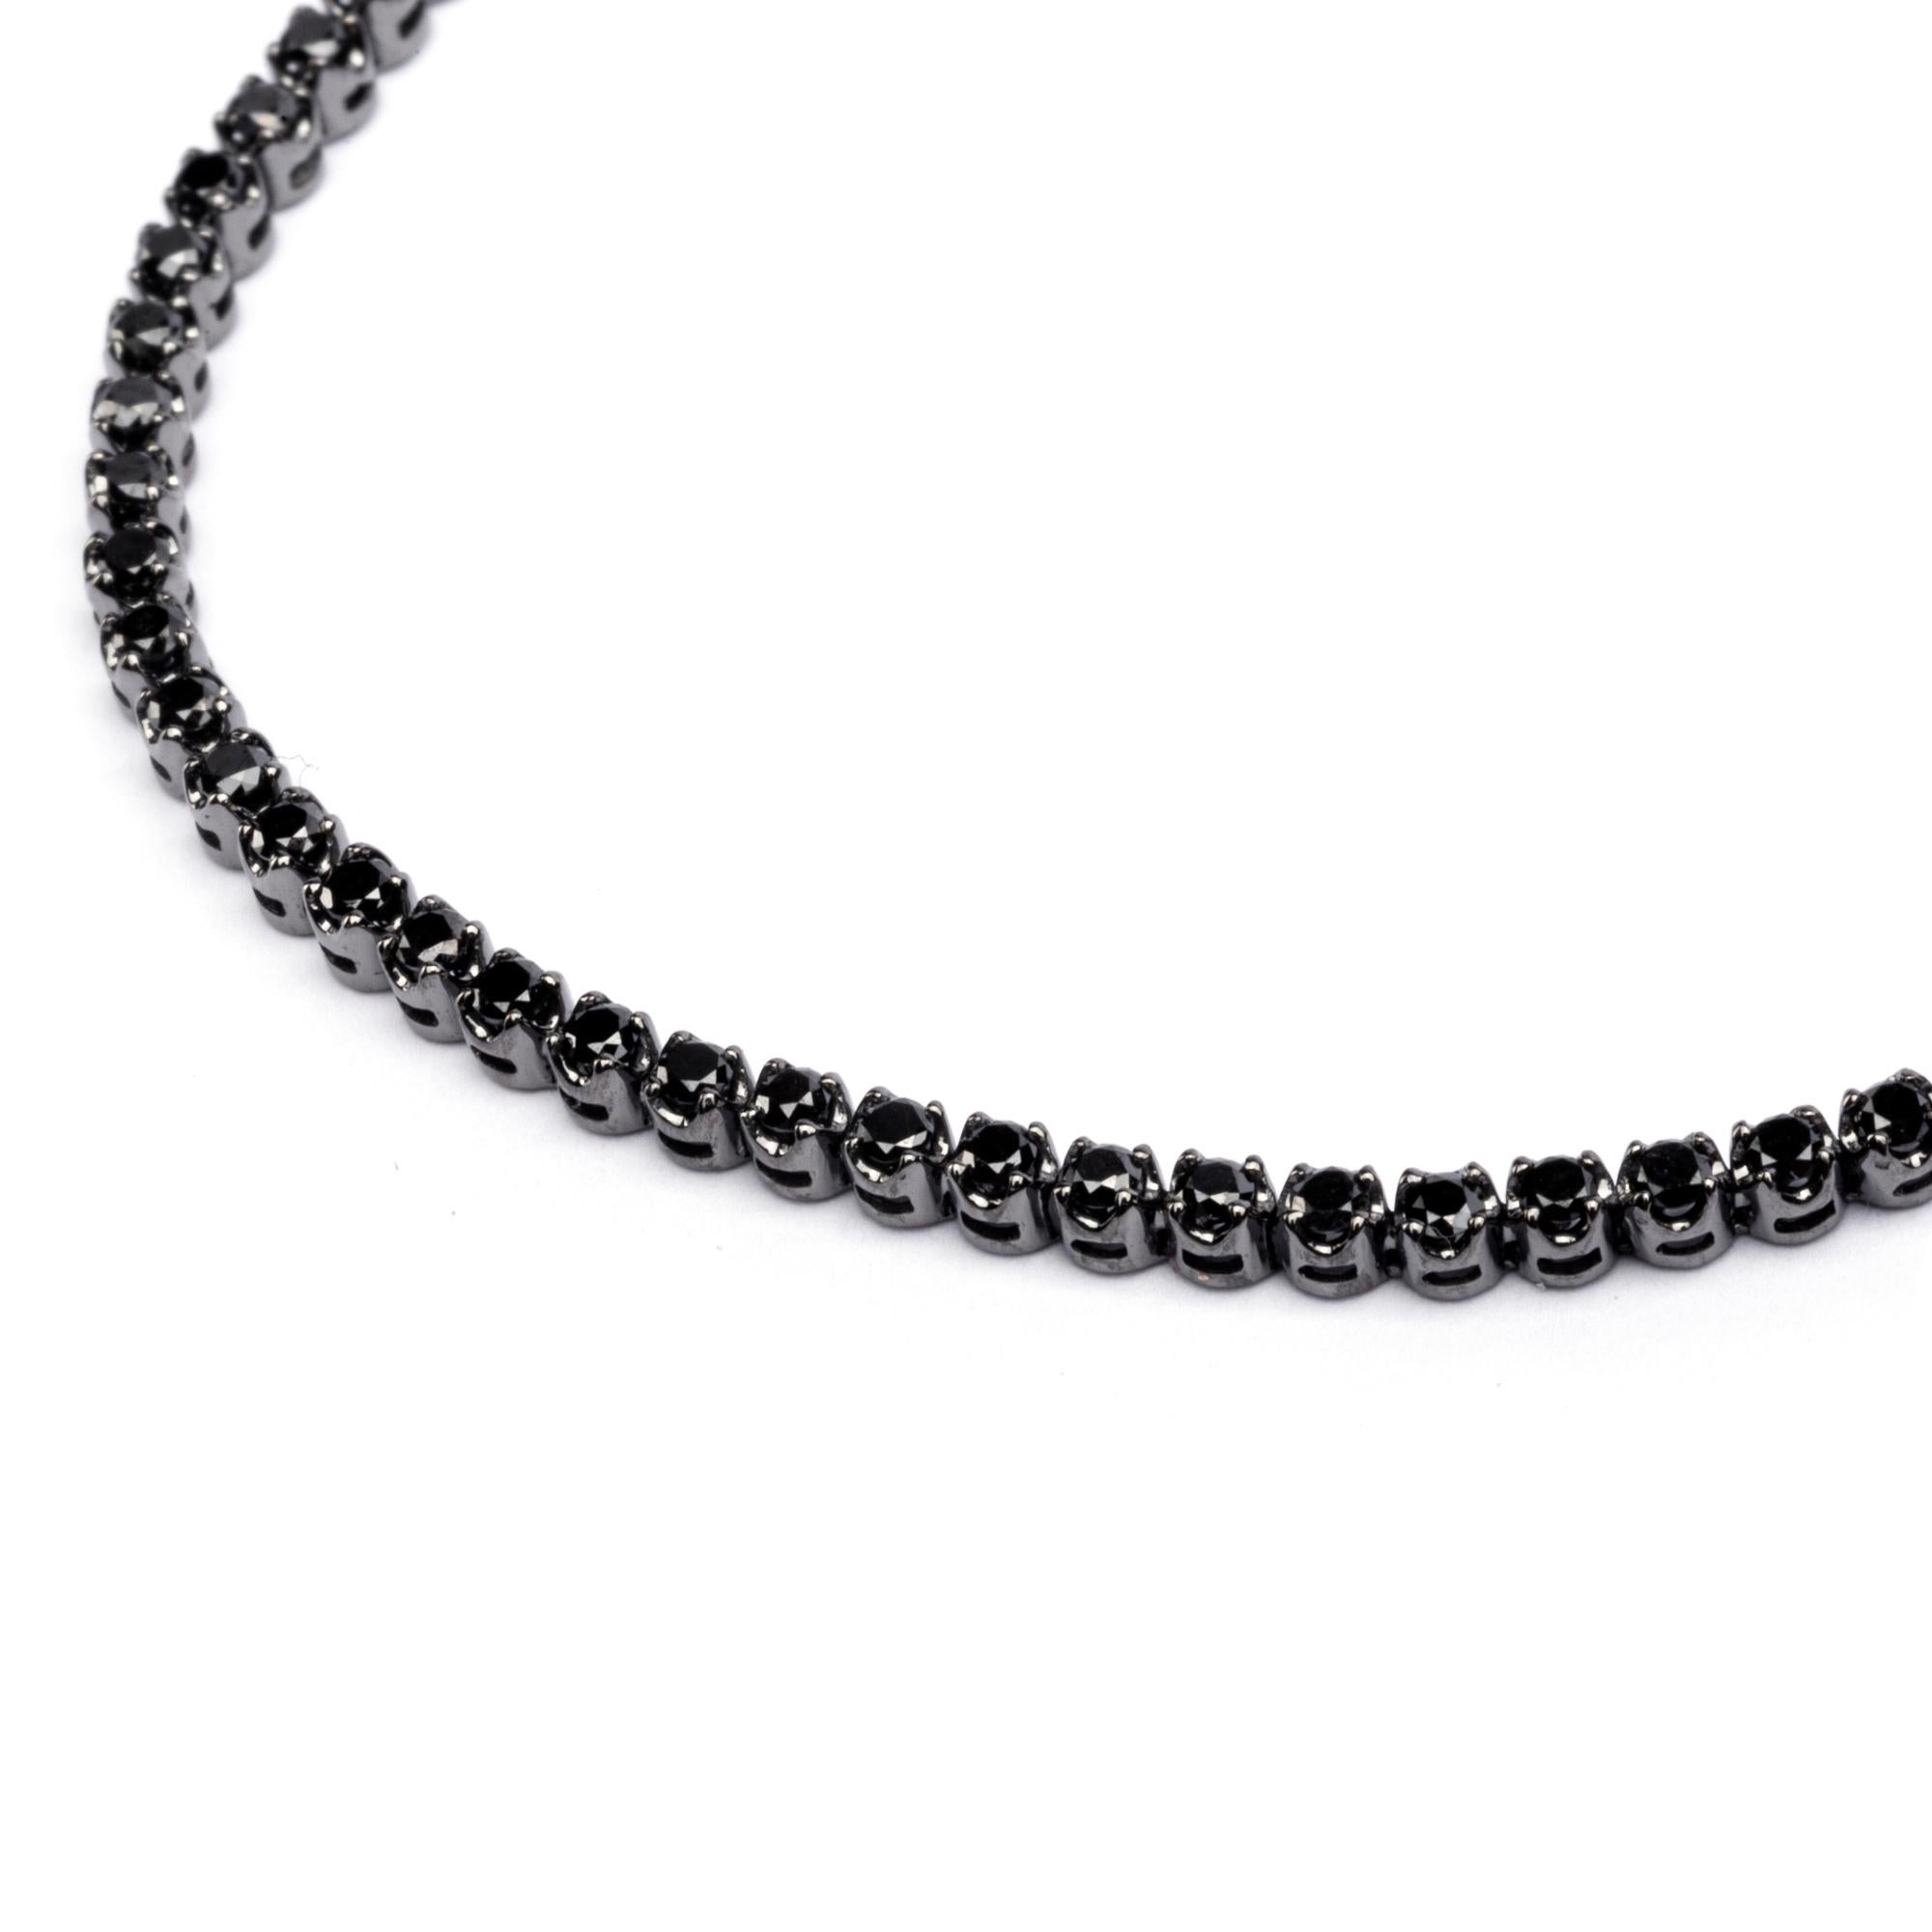 Alex Jona design collection, hand crafted in Italy, 18 karat black rhodium white gold tennis bracelet, 7.48 in/19 cm long, set with 70 black diamonds weighing 3.22 carats in total. Dimensions: 7.48 in. L / 0.09 in. D/ 0.13 in. H - 190 mm L / 2.50 mm